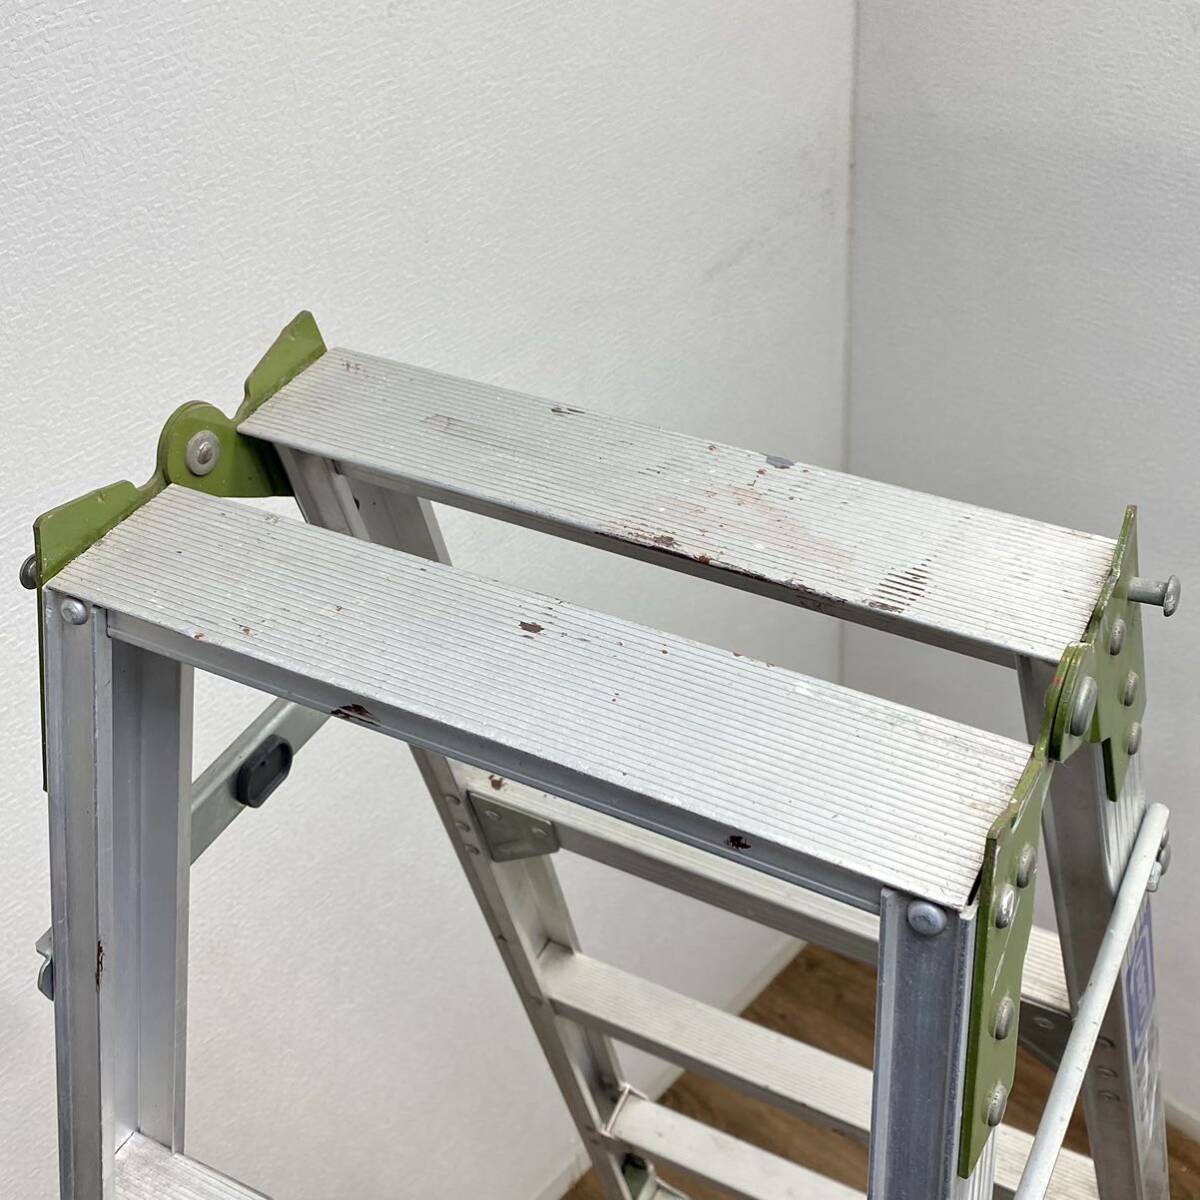 0 Hasegawa aluminium alloy made legs part flexible type stepladder tabletop height 1.35~1.76m ladder total length 2.86~3.69m Hasegawa rabbit KF-15 secondhand goods # Hyogo prefecture Himeji city departure 